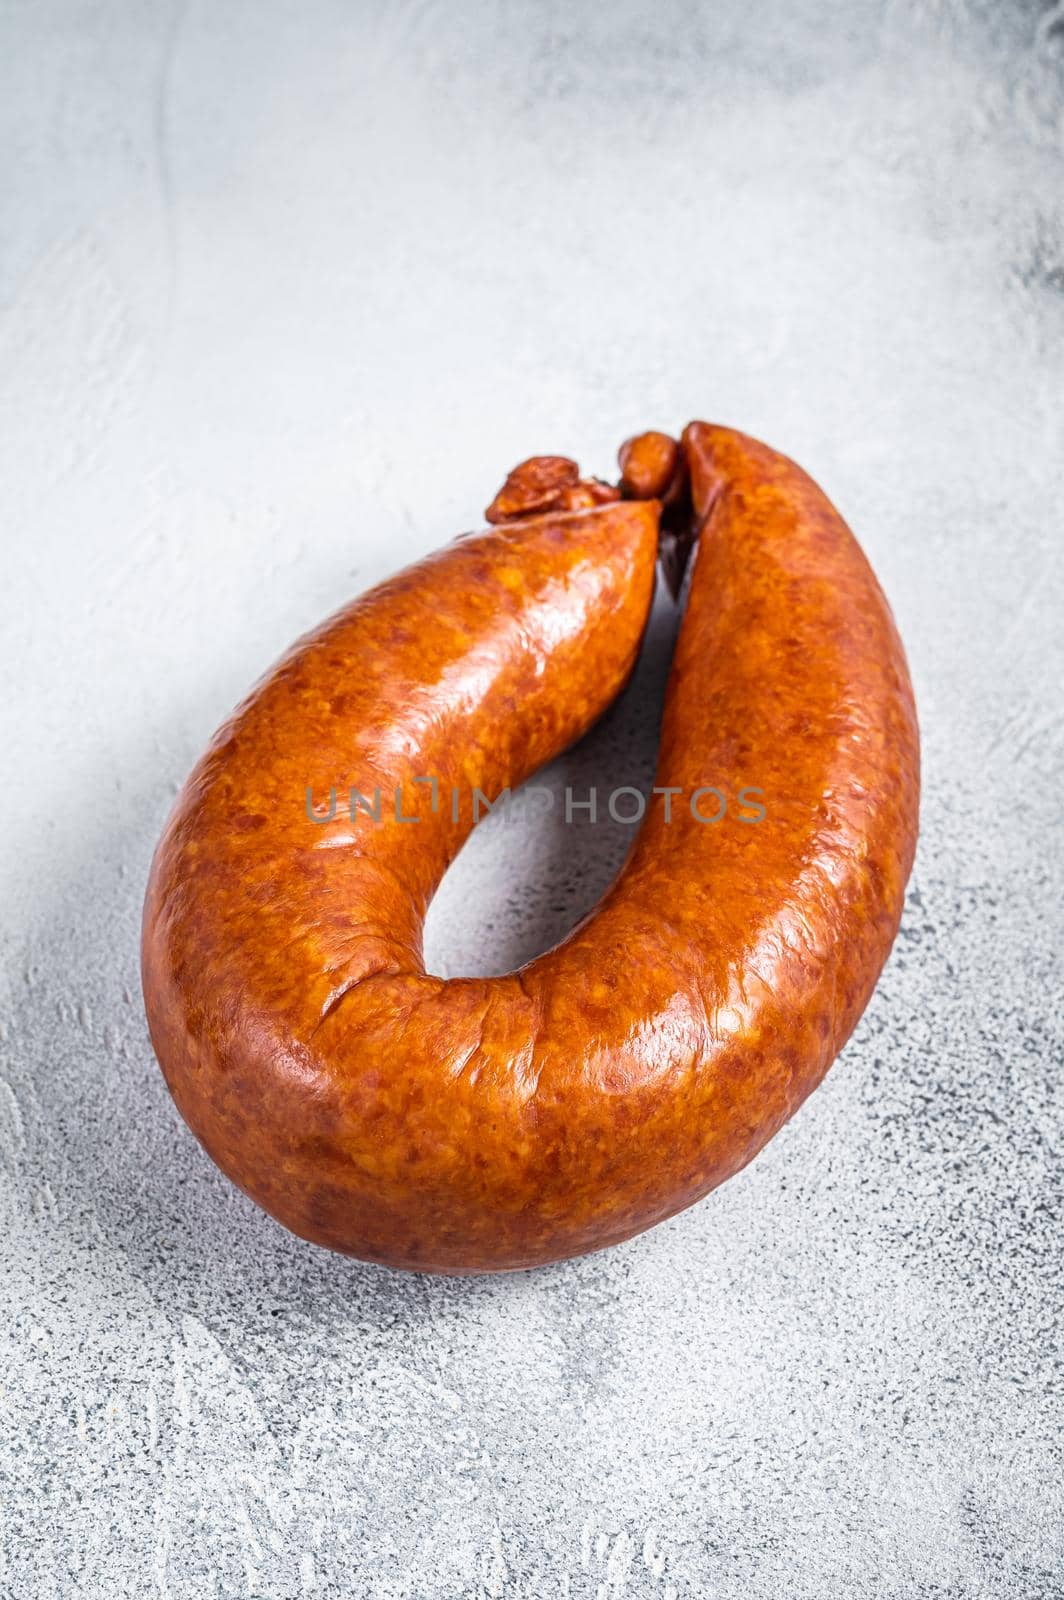 Smoked sausage on a white rustic table. White background. Top view.